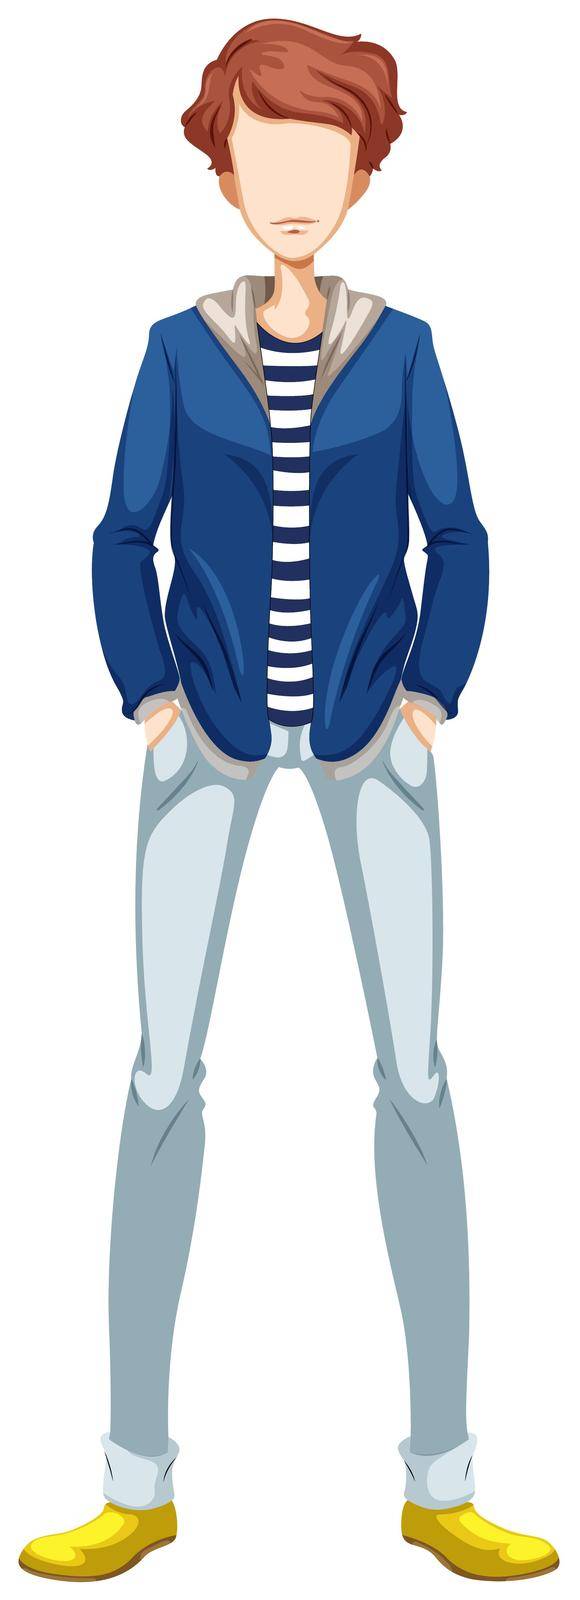 Sketch of a man wearing stripes t-shirt with blue jacket and a pair of blue jeans